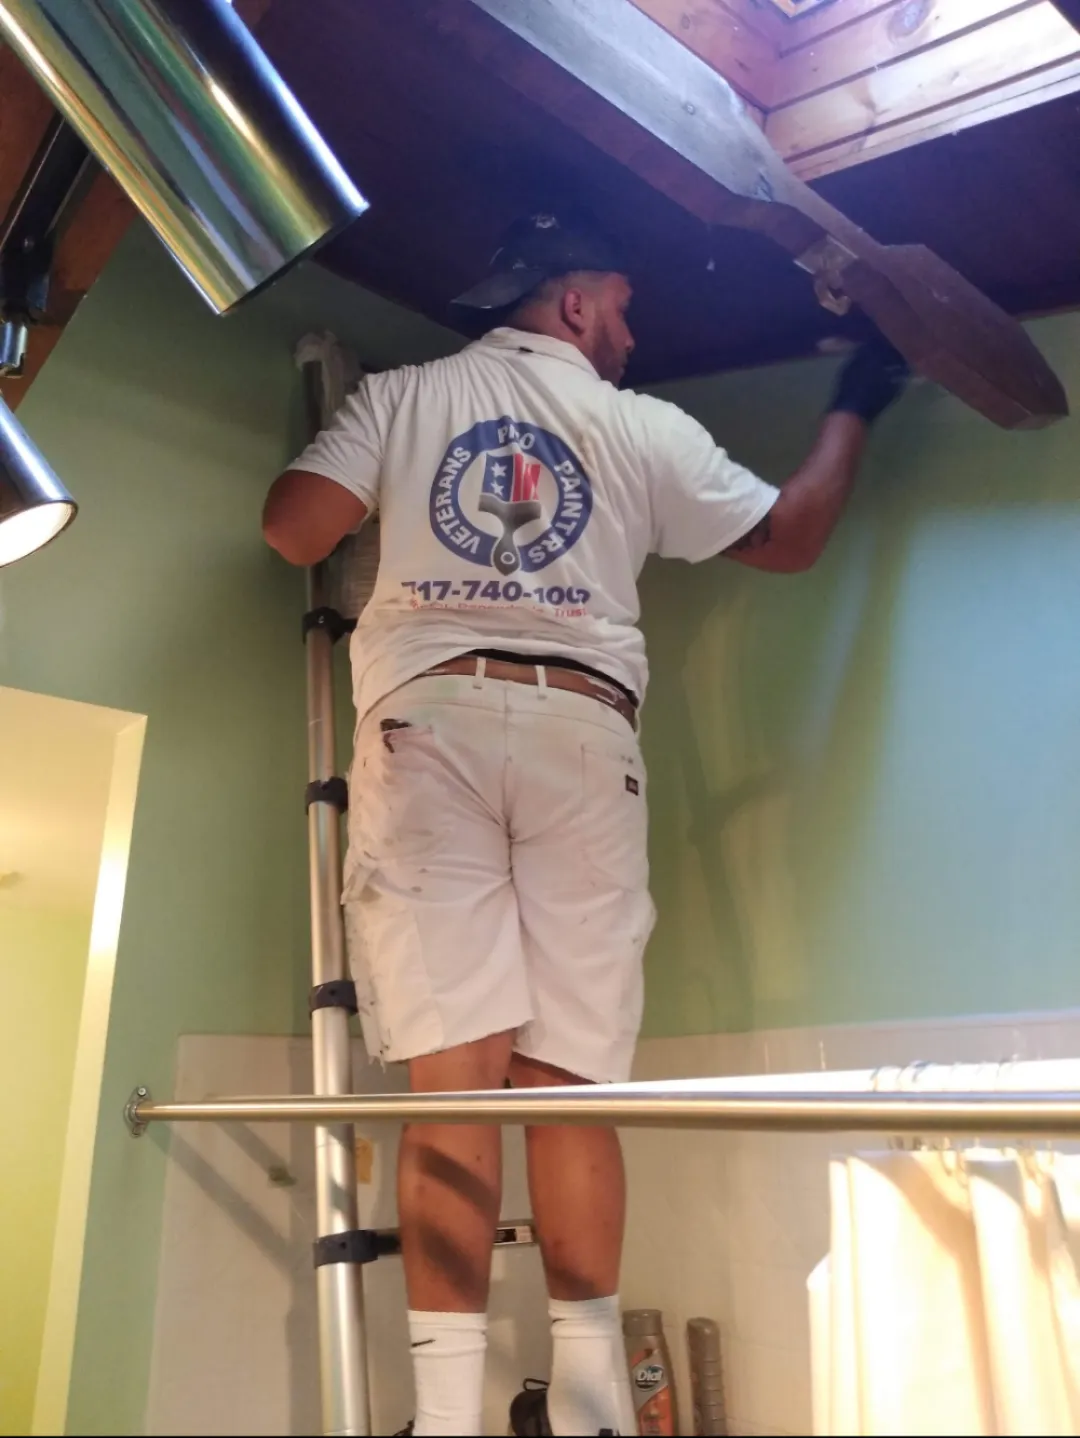 Interior Painting for Veterans Pro Painters in Lititz, PA